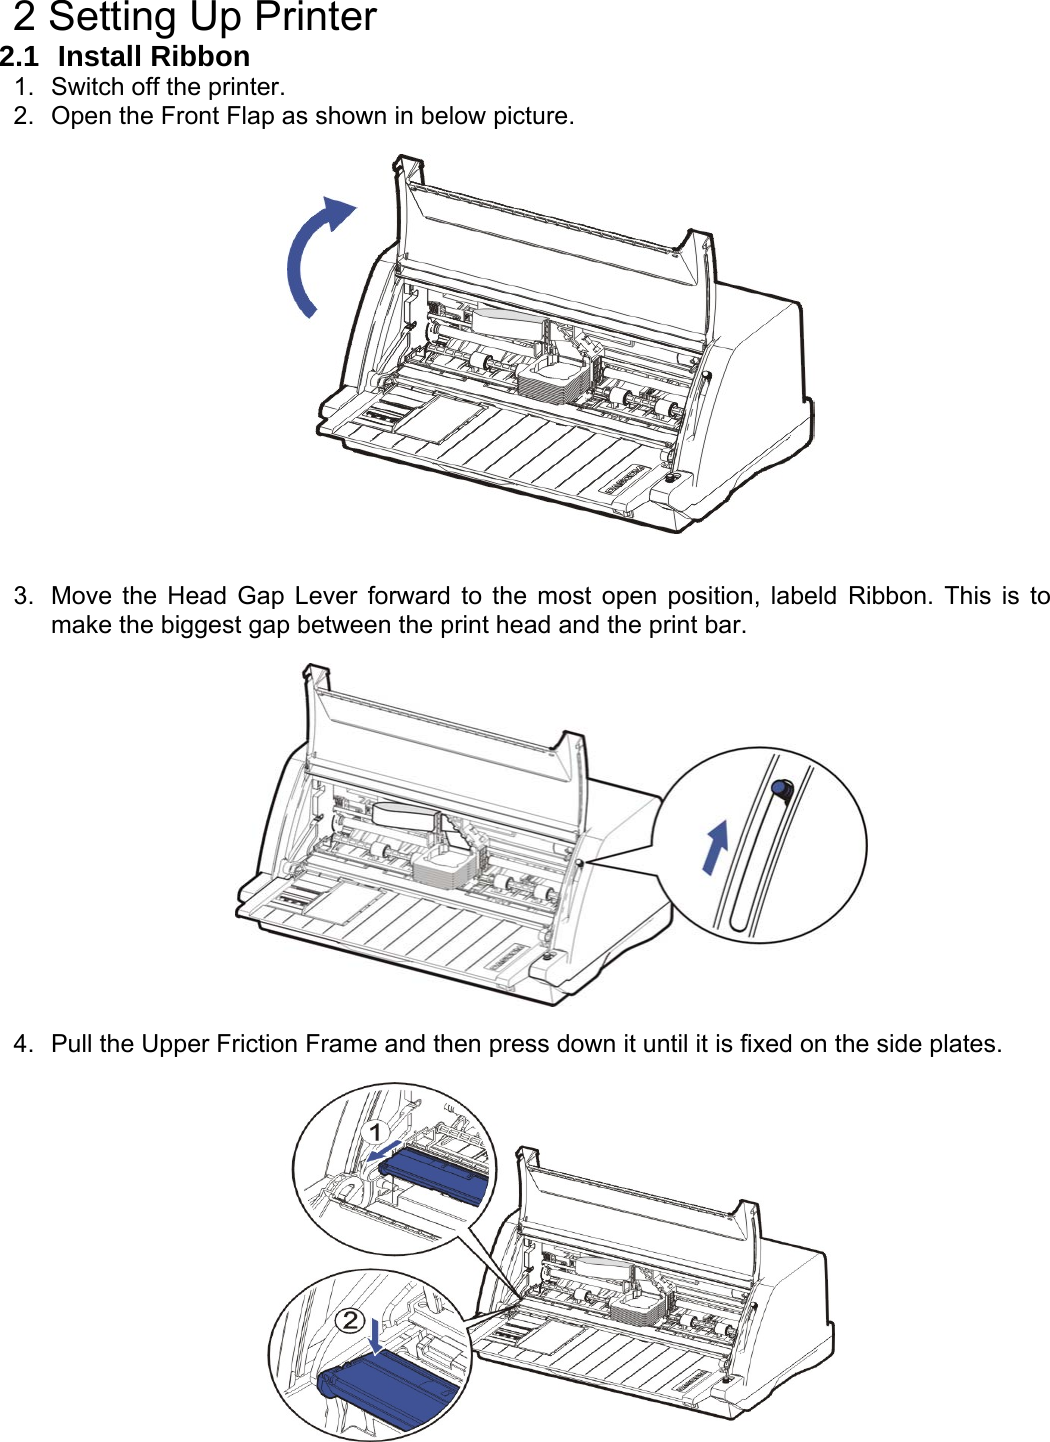    2 Setting Up Printer 2.1  Install Ribbon 1.  Switch off the printer. 2.  Open the Front Flap as shown in below picture.     3.  Move the Head Gap Lever forward to the most open position, labeld Ribbon. This is to make the biggest gap between the print head and the print bar.    4.  Pull the Upper Friction Frame and then press down it until it is fixed on the side plates.   